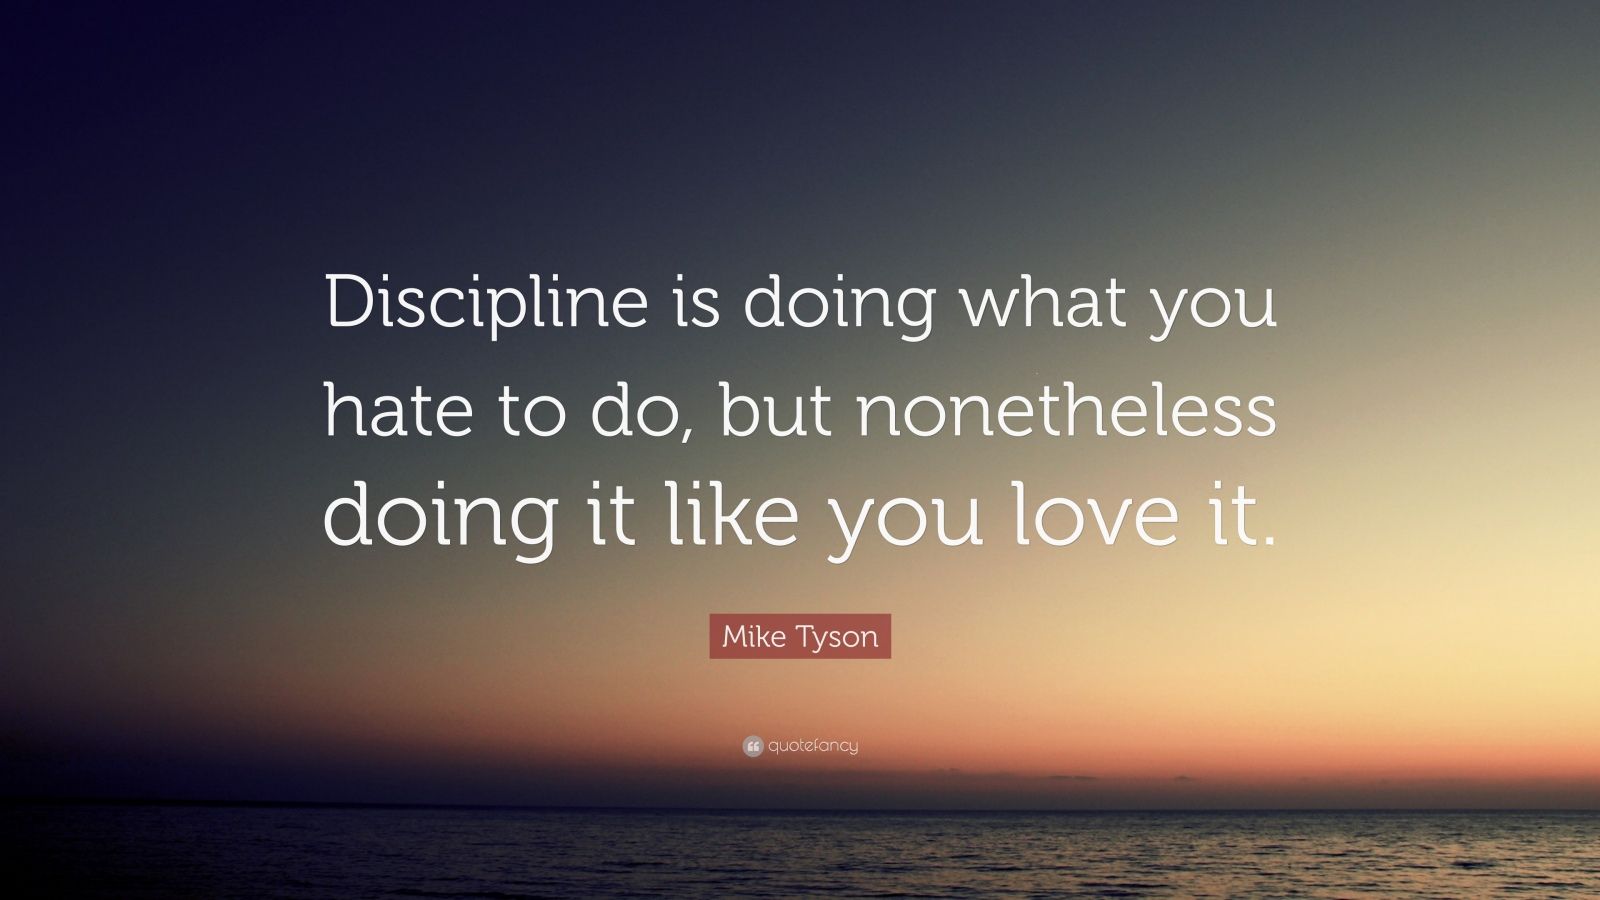 1785658 Mike Tyson Quote Discipline is doing what you hate to do but